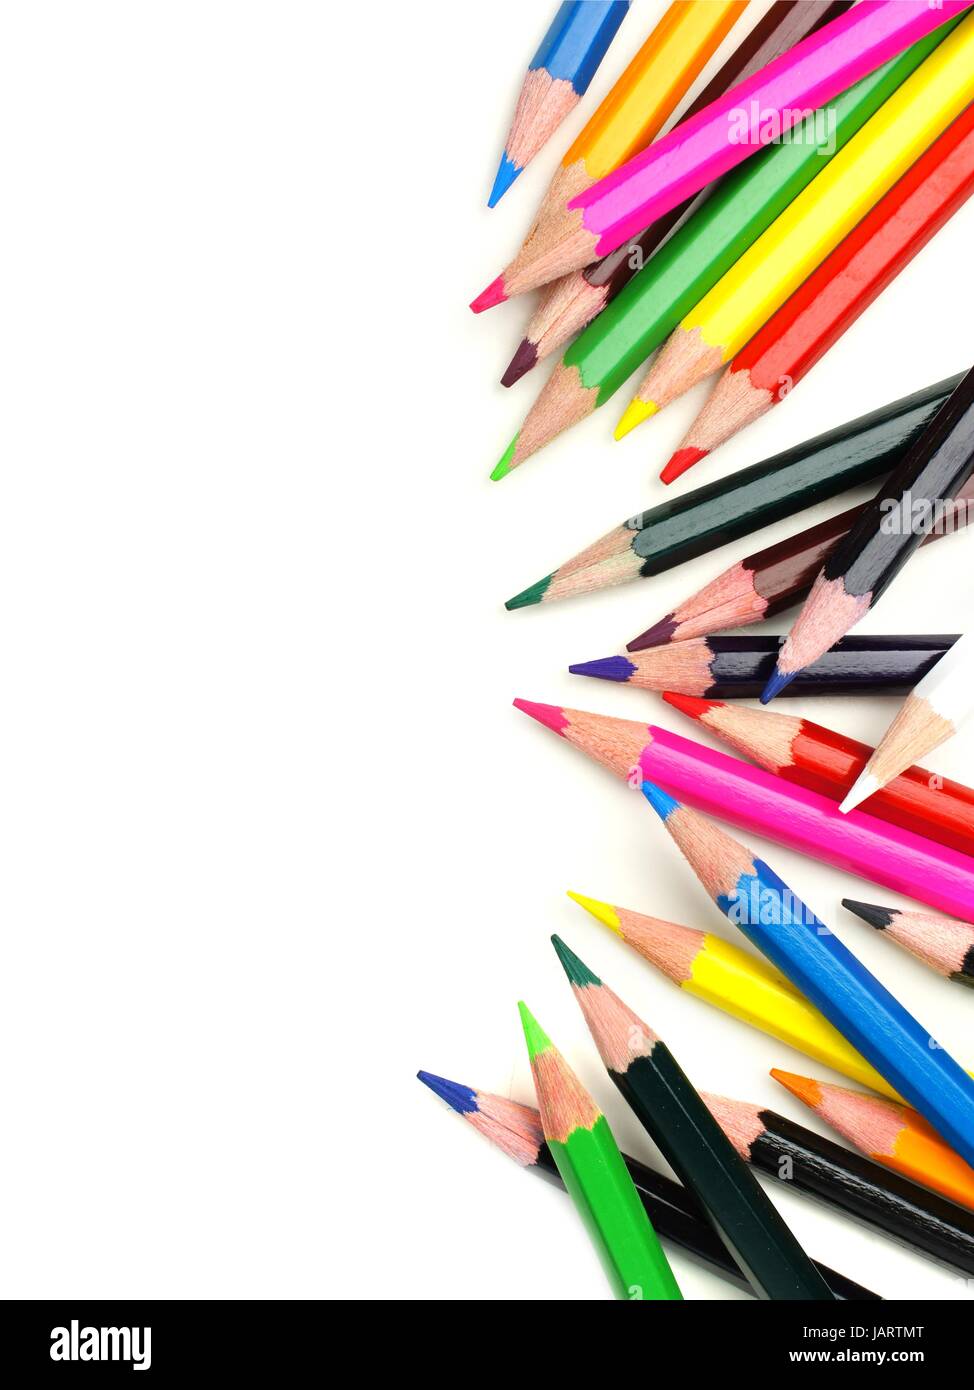 Colorful scattered pencil crayon border over a white background Stock Photo